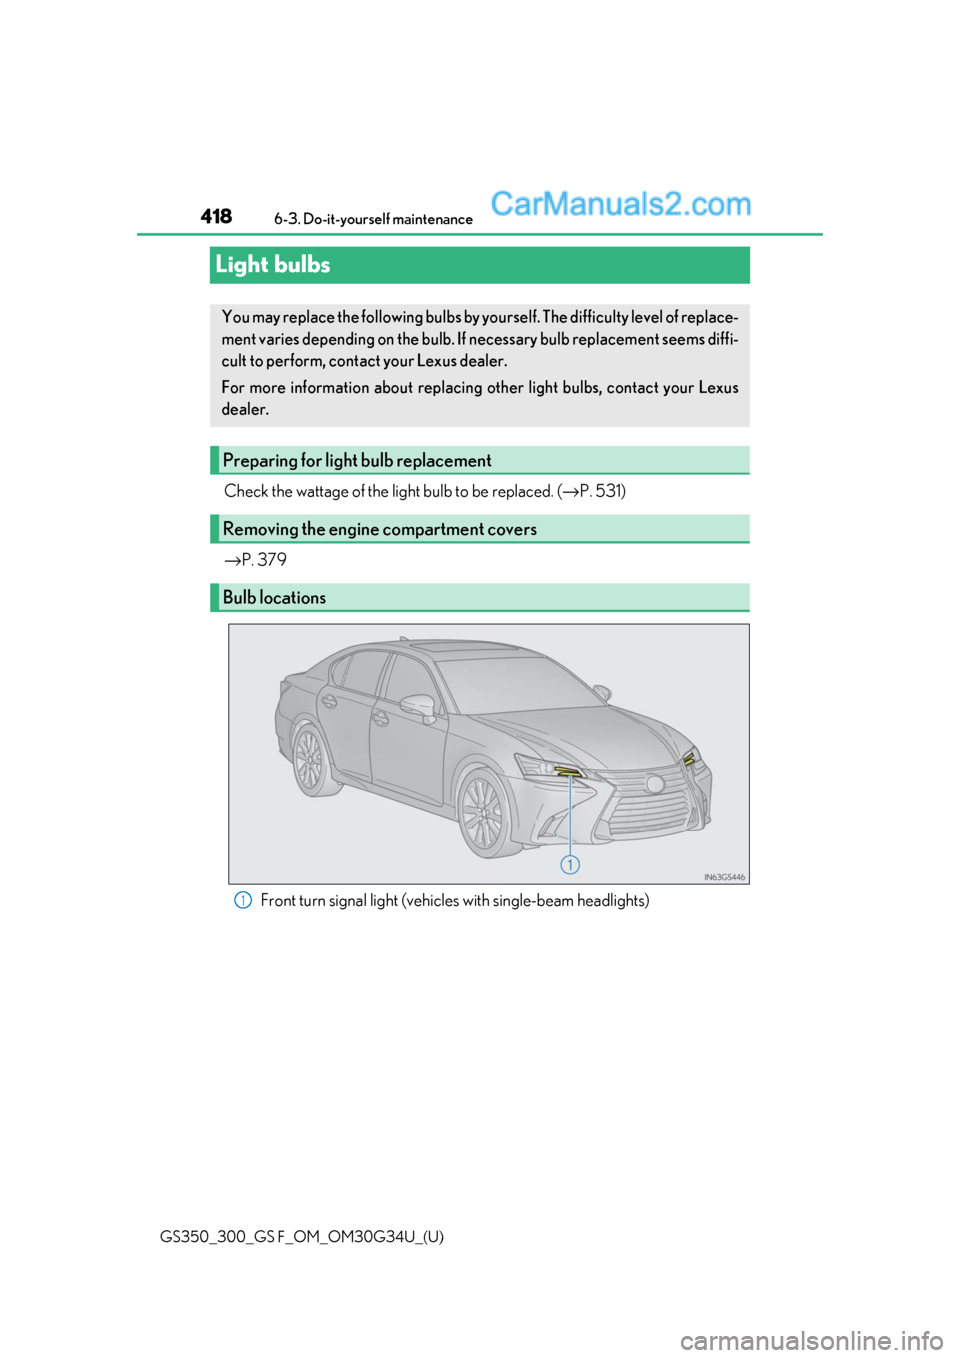 Lexus GS300 2018  s Service Manual 418
GS350_300_GS F_OM_OM30G34U_(U)6-3. Do-it-yourself maintenance
Light bulbs
Check the wattage of the light bulb to be replaced. (
→P. 531)
→ P. 379
Front turn signal light (vehicles with single-